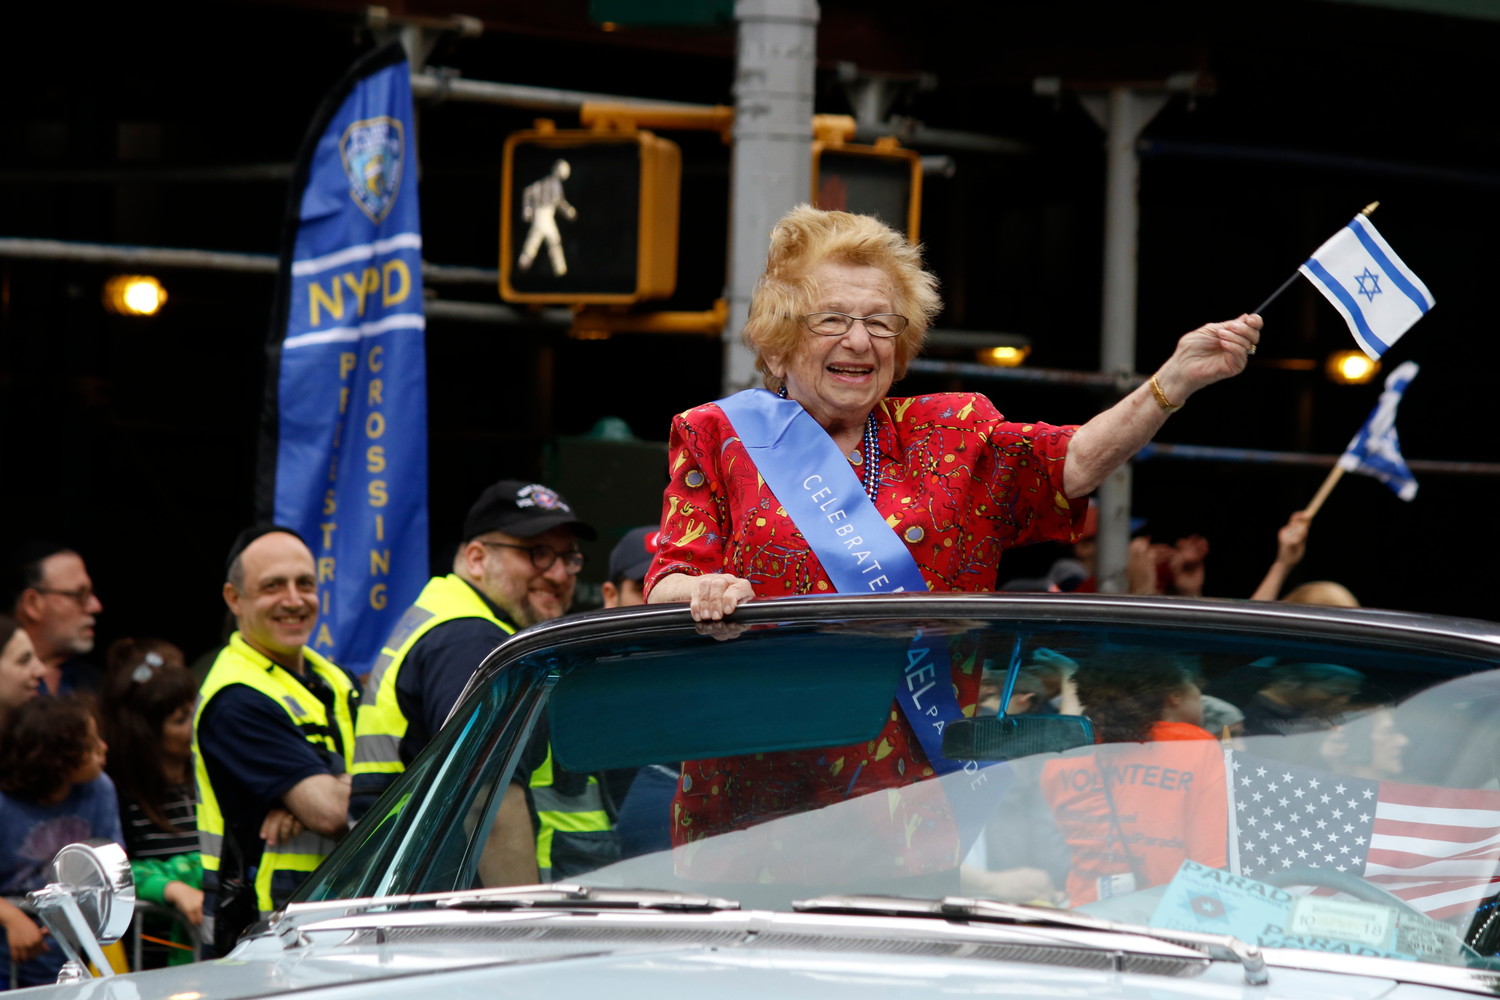 90-year-old Dr. Ruth Westheimer was a crowd favorite.